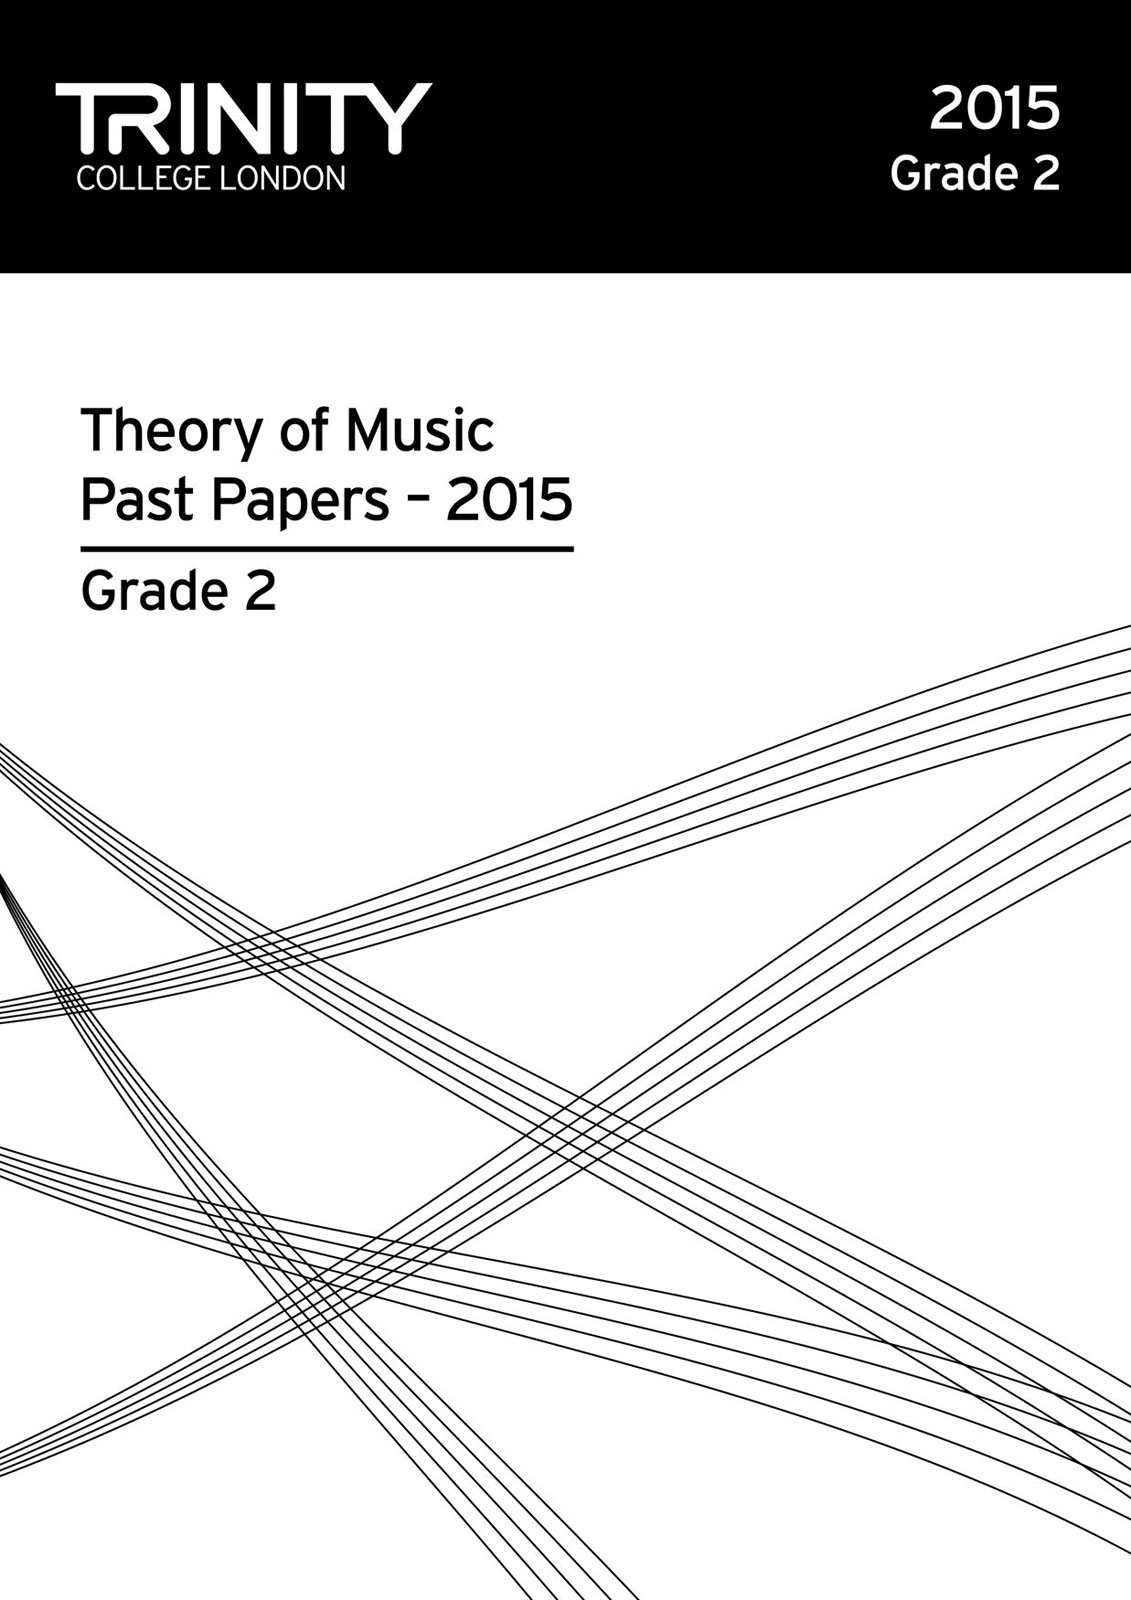 TRINITY GUILDHALL TRINITY COLLEGE LONDON THEORY OF MUSIC PAST PAPER (2015) GRADE 2 (ALL INSTRUMENTS)